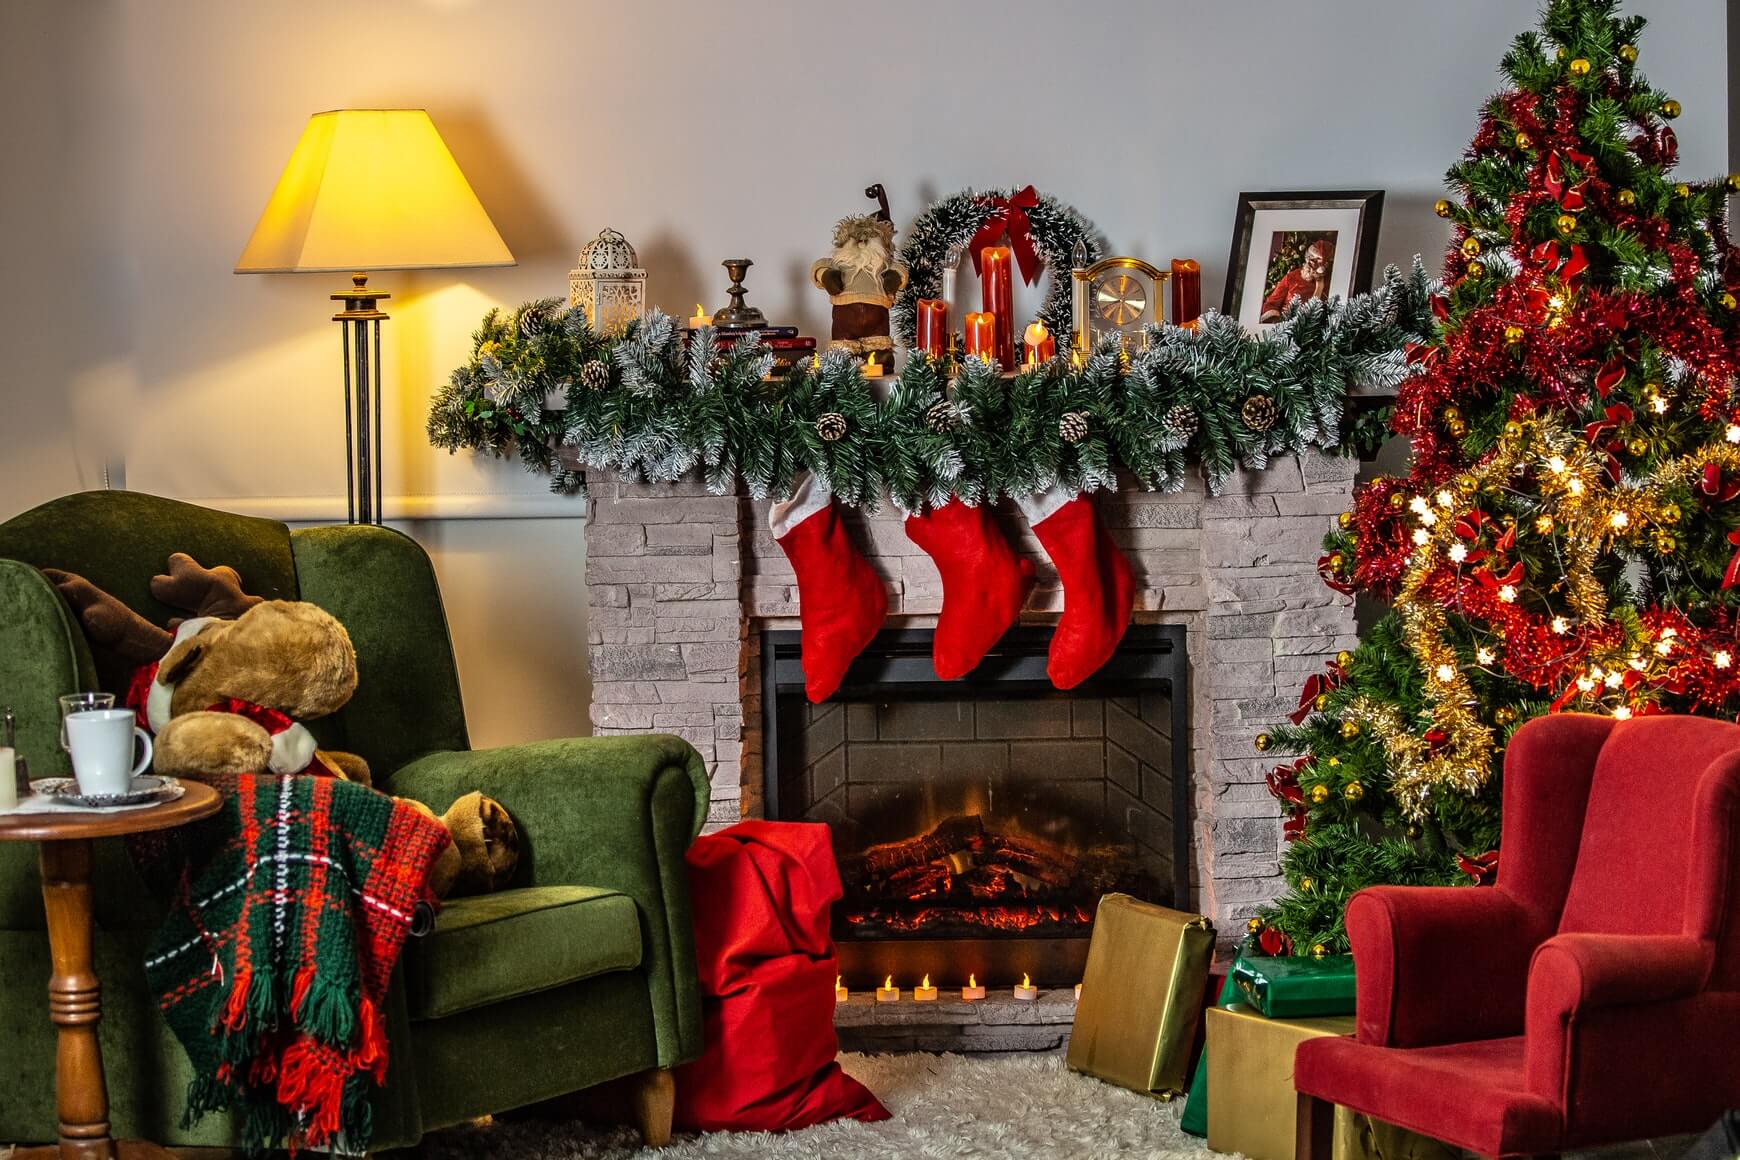 a living room christmas interior full of reds and greens with stockings on a fireplace and a christmas tree